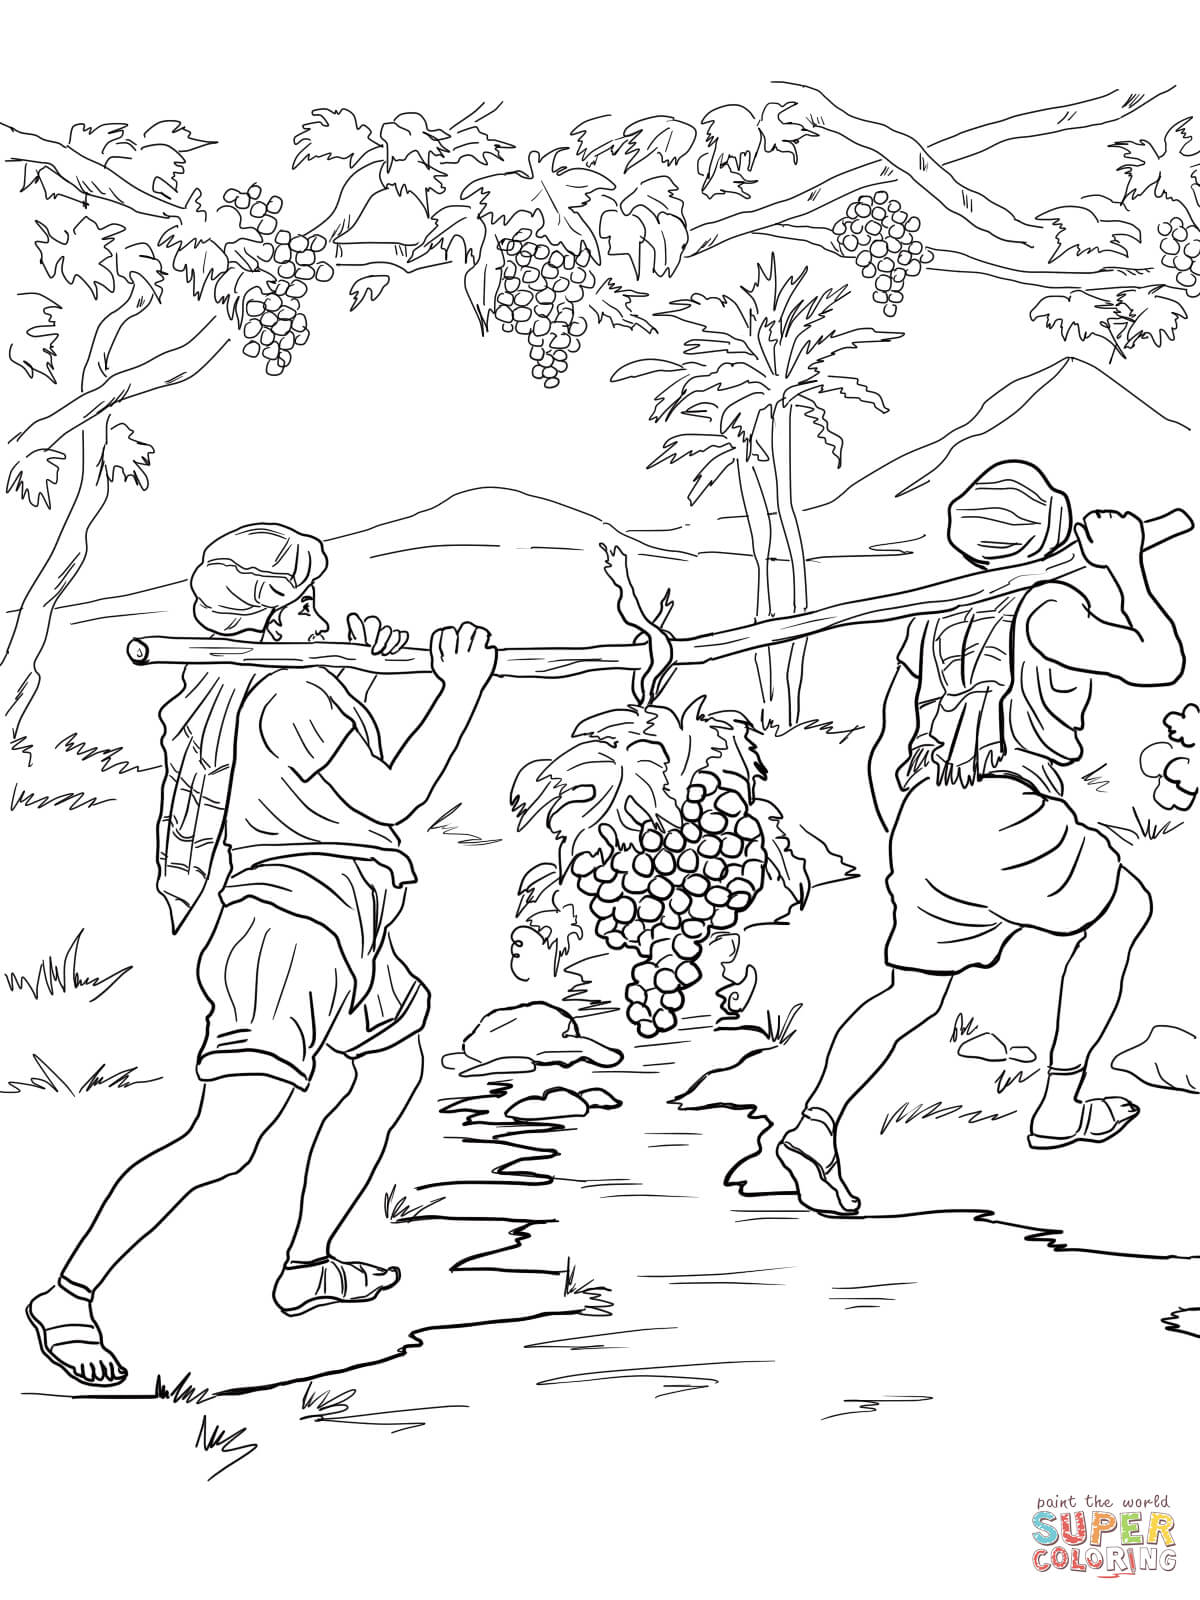 Joshua and the Israelites Cross the Jordan River coloring page ...